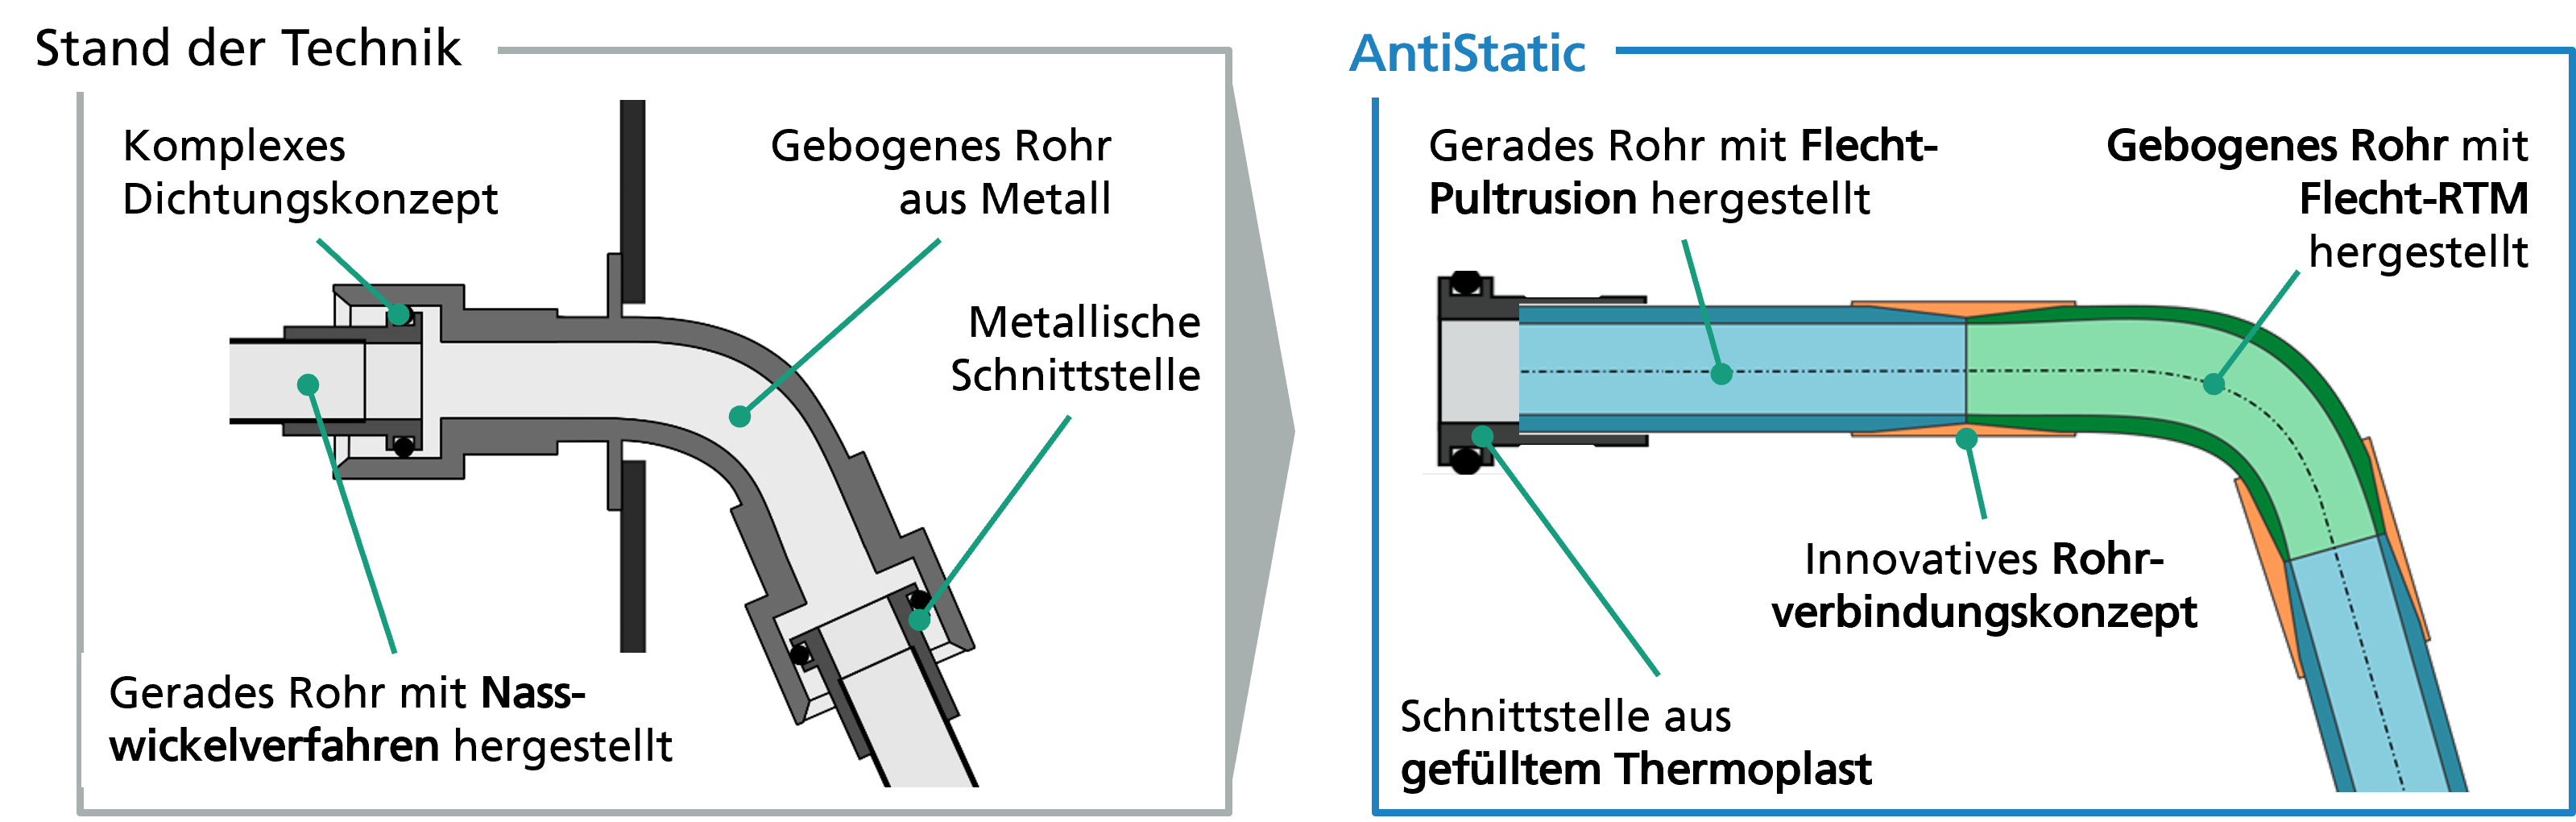 Figure 1: State of the Art (left) versus the innovative technology developed in AntiStatic (right)